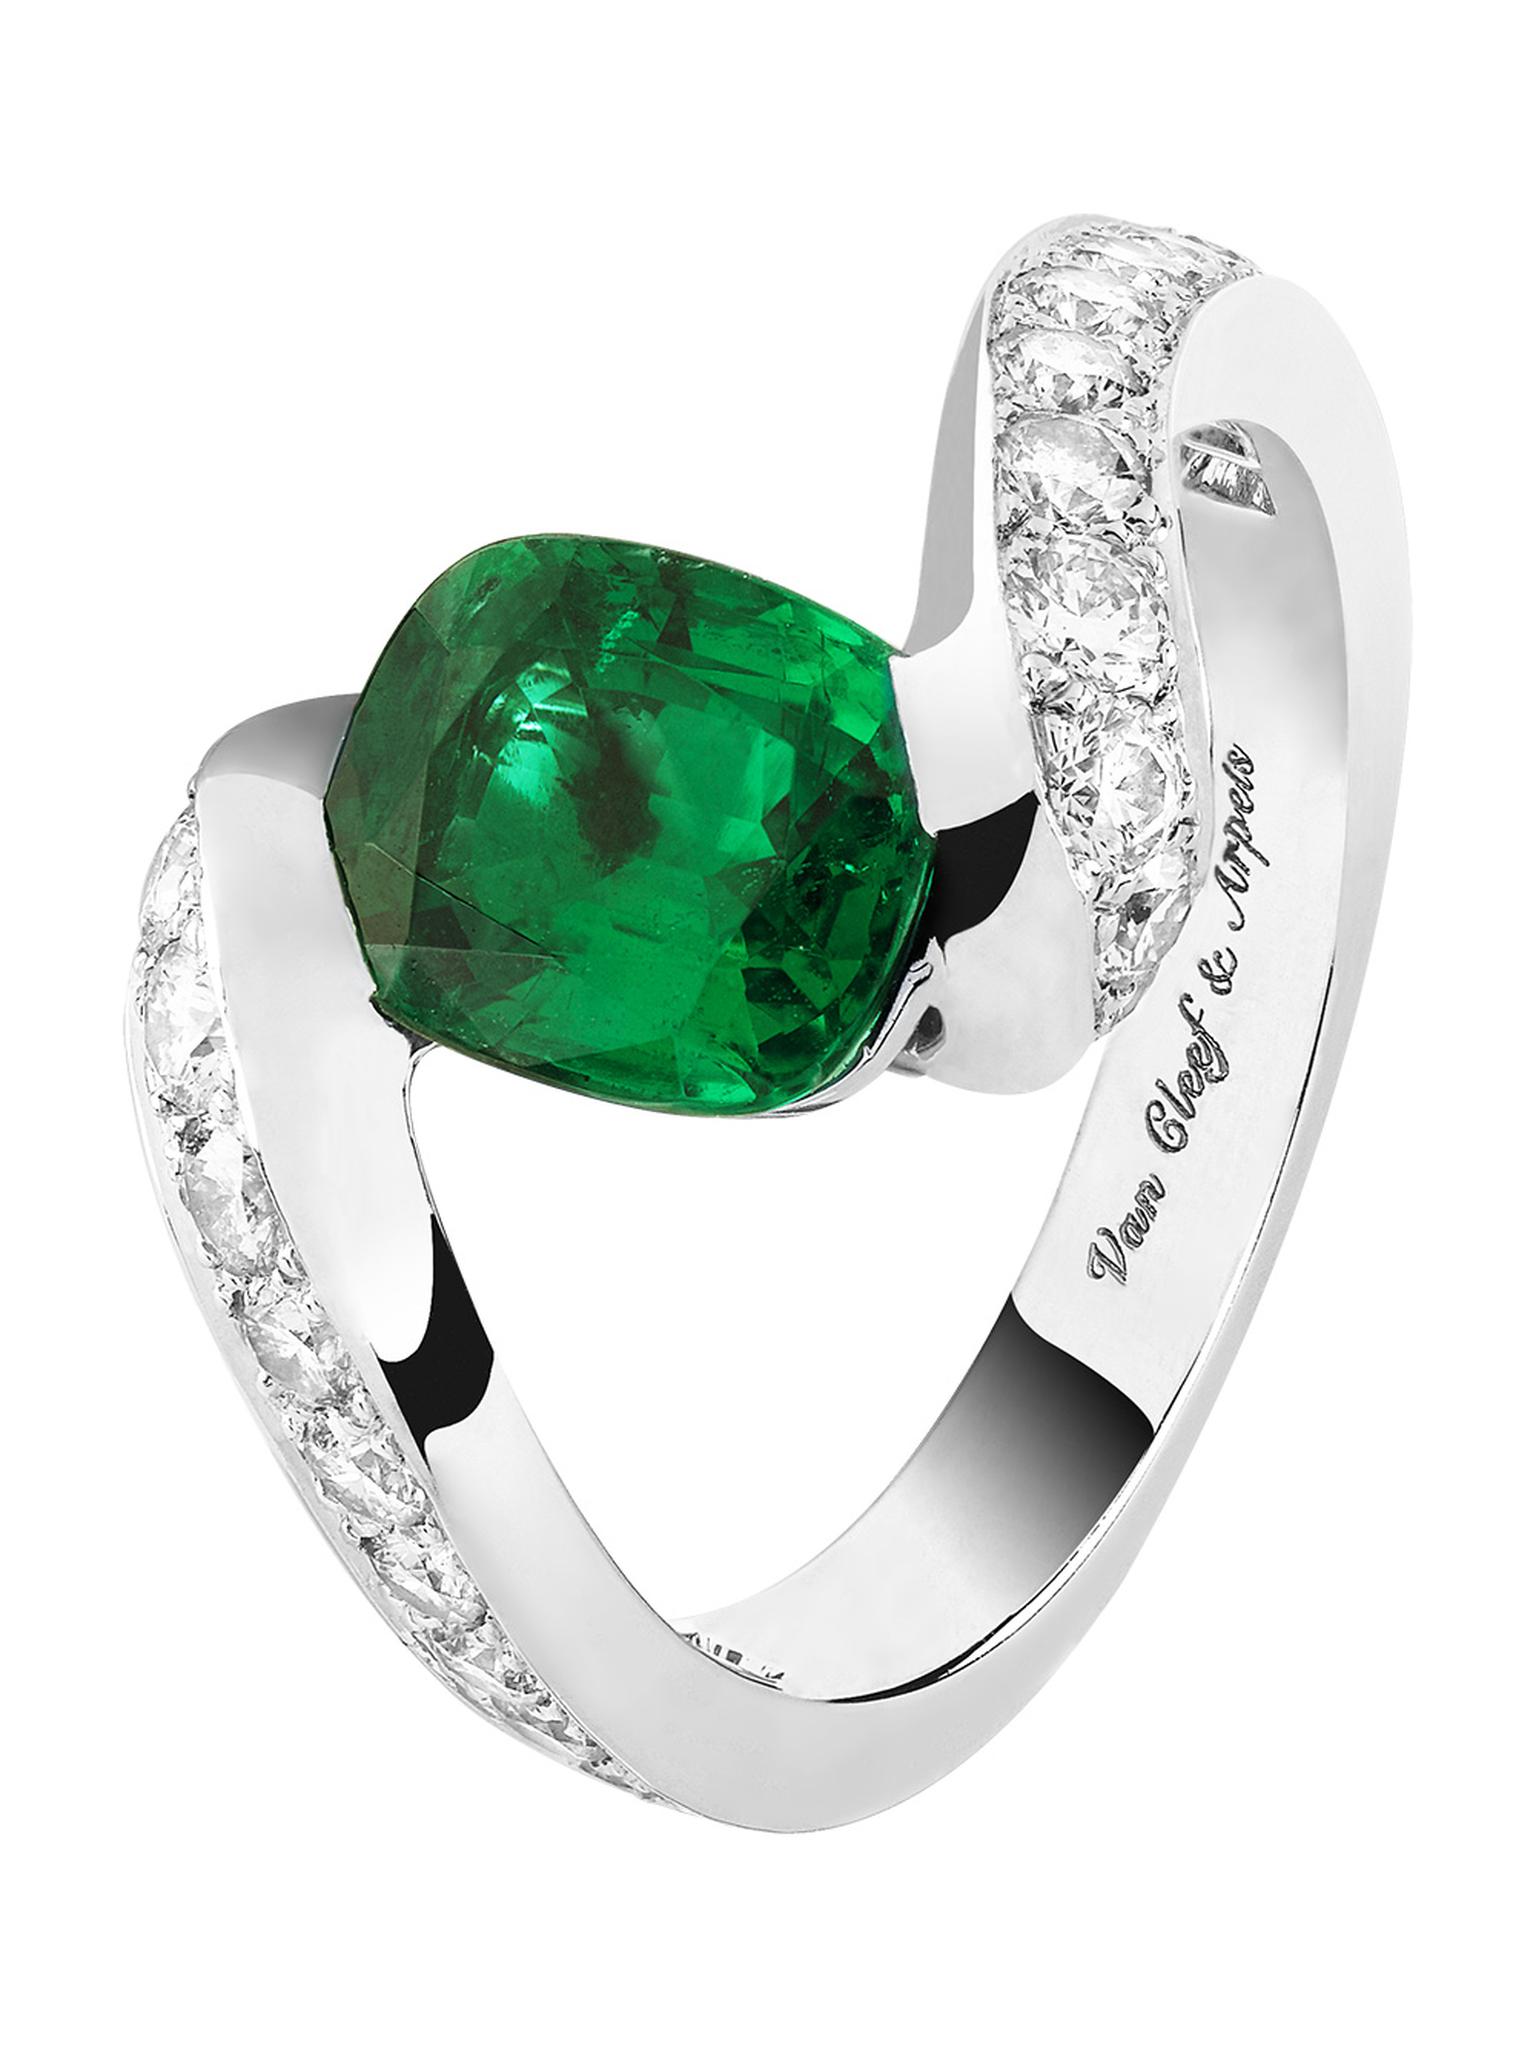 Van Cleef & Arpels Hirondelle Solitaire in platinum, set with round diamonds and a 1.79ct cushion-cut emerald.